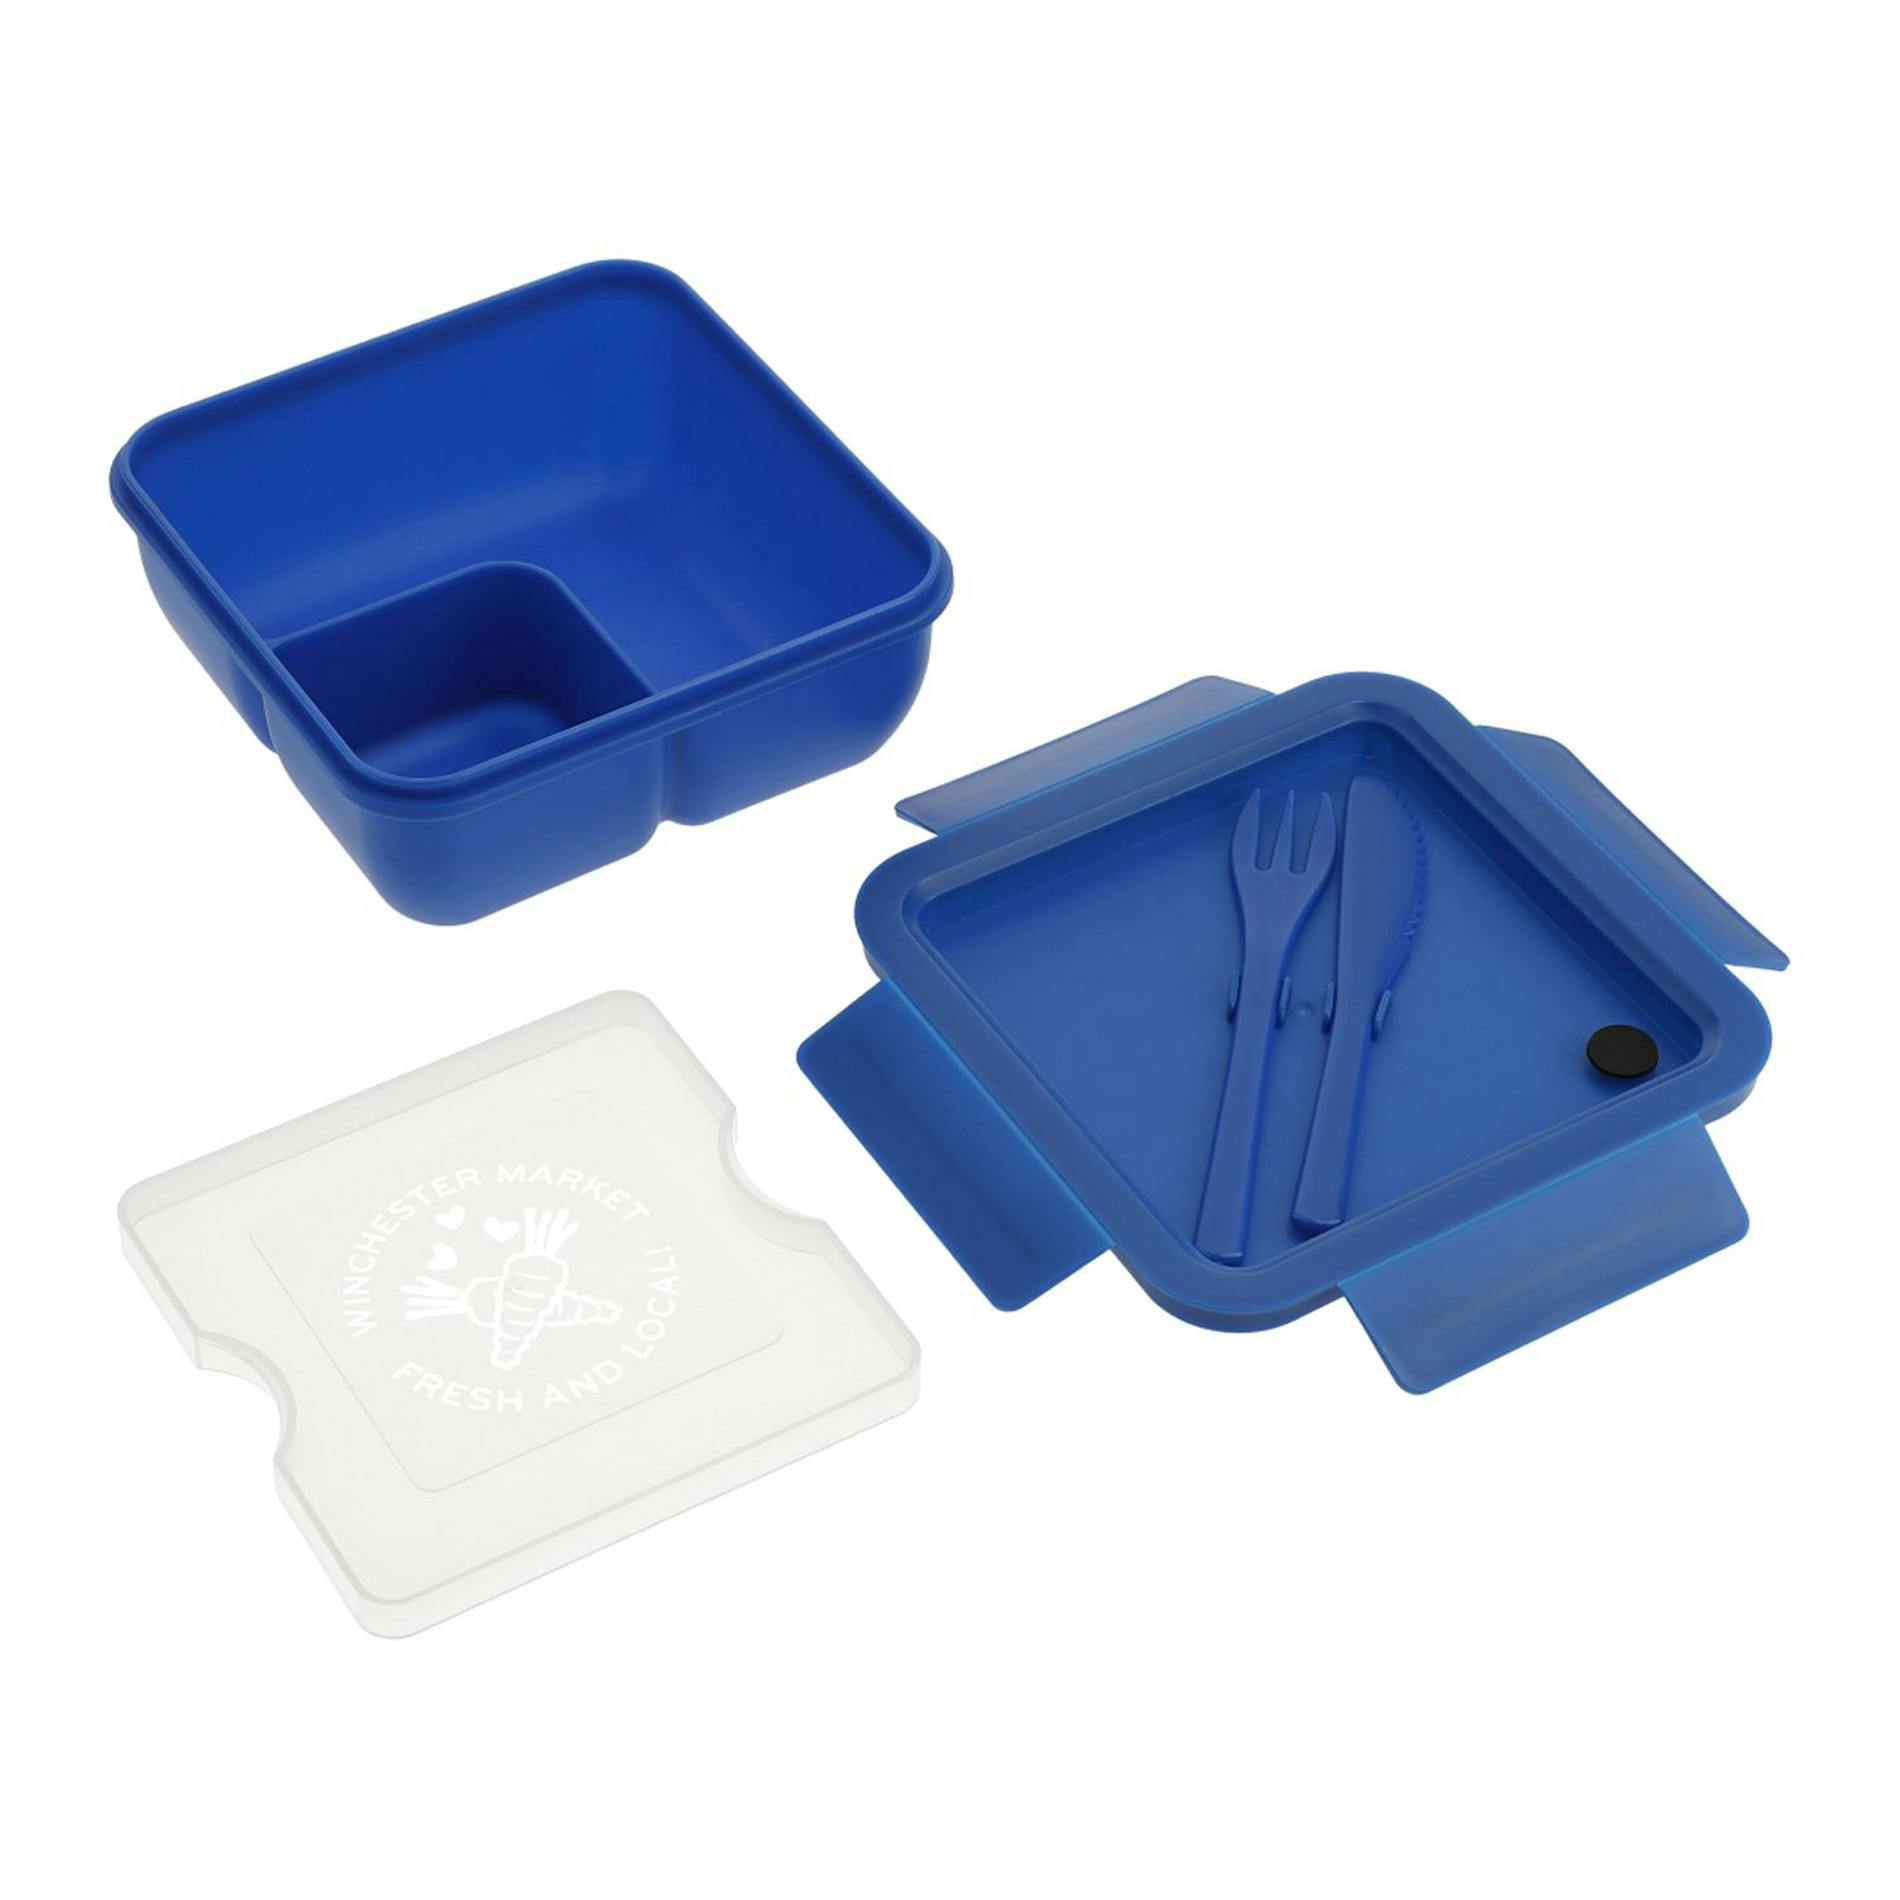 Recycled Plastic Lunch To Go Set - additional Image 3